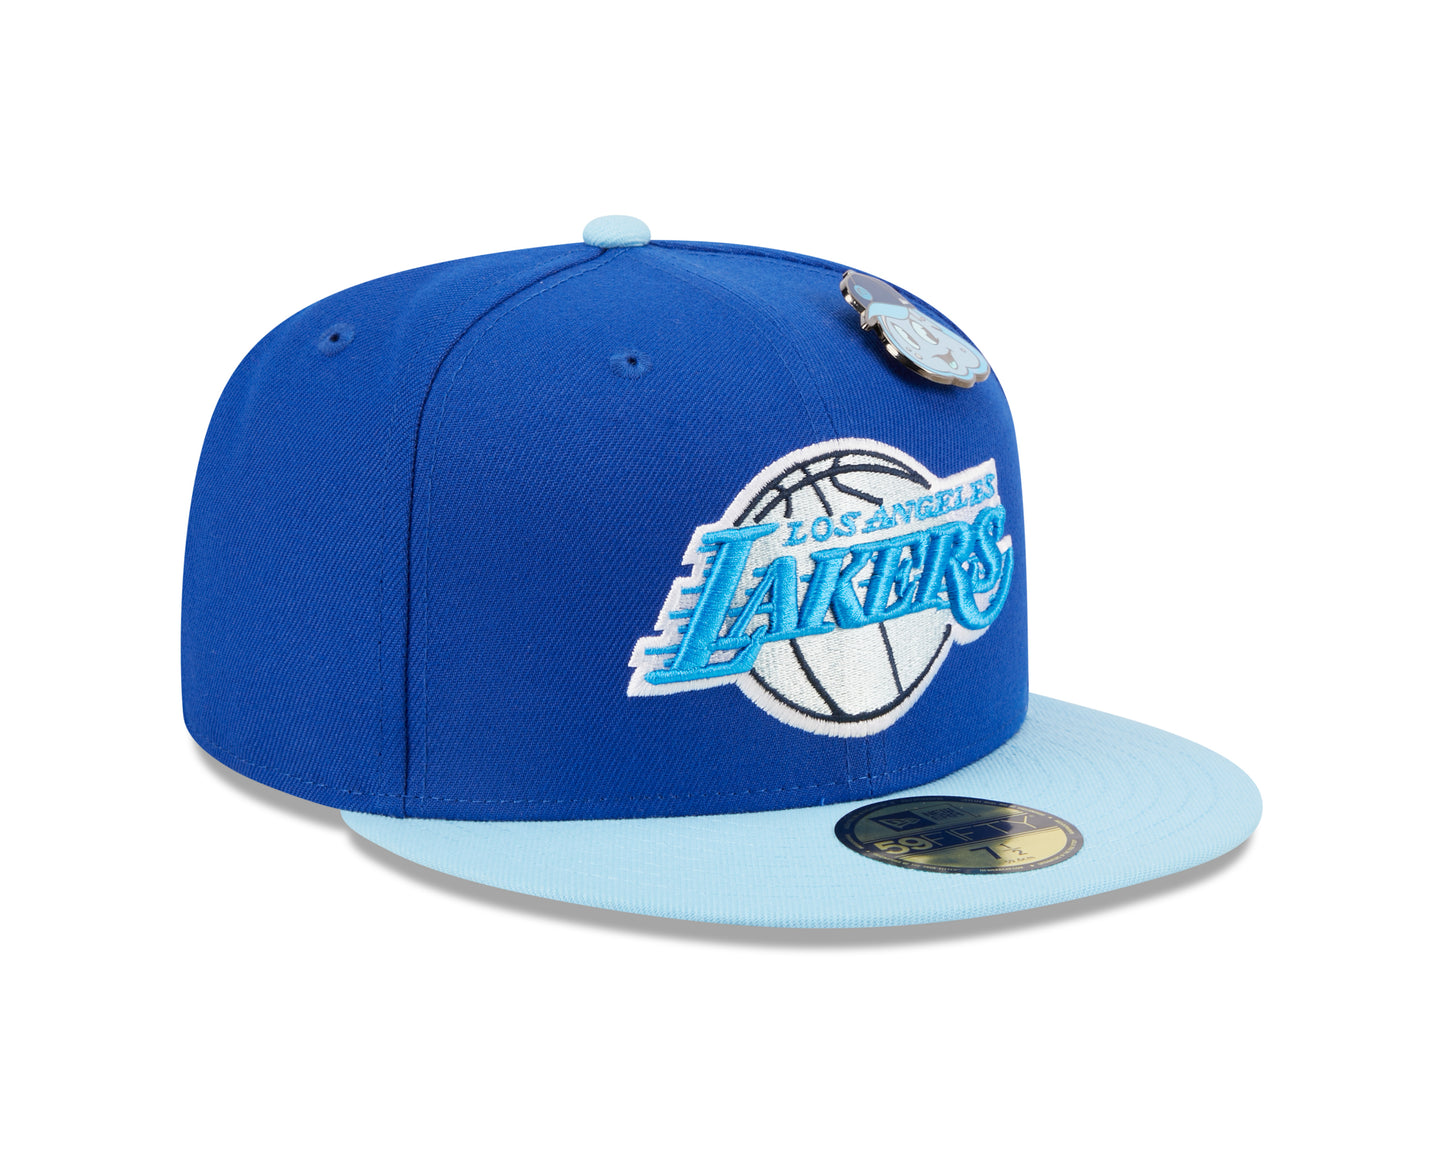 New Era 59fifty Fitted Cap Los Angeles Lakers THE ELEMENTS - Blue/Sky Blue - Headz Up 